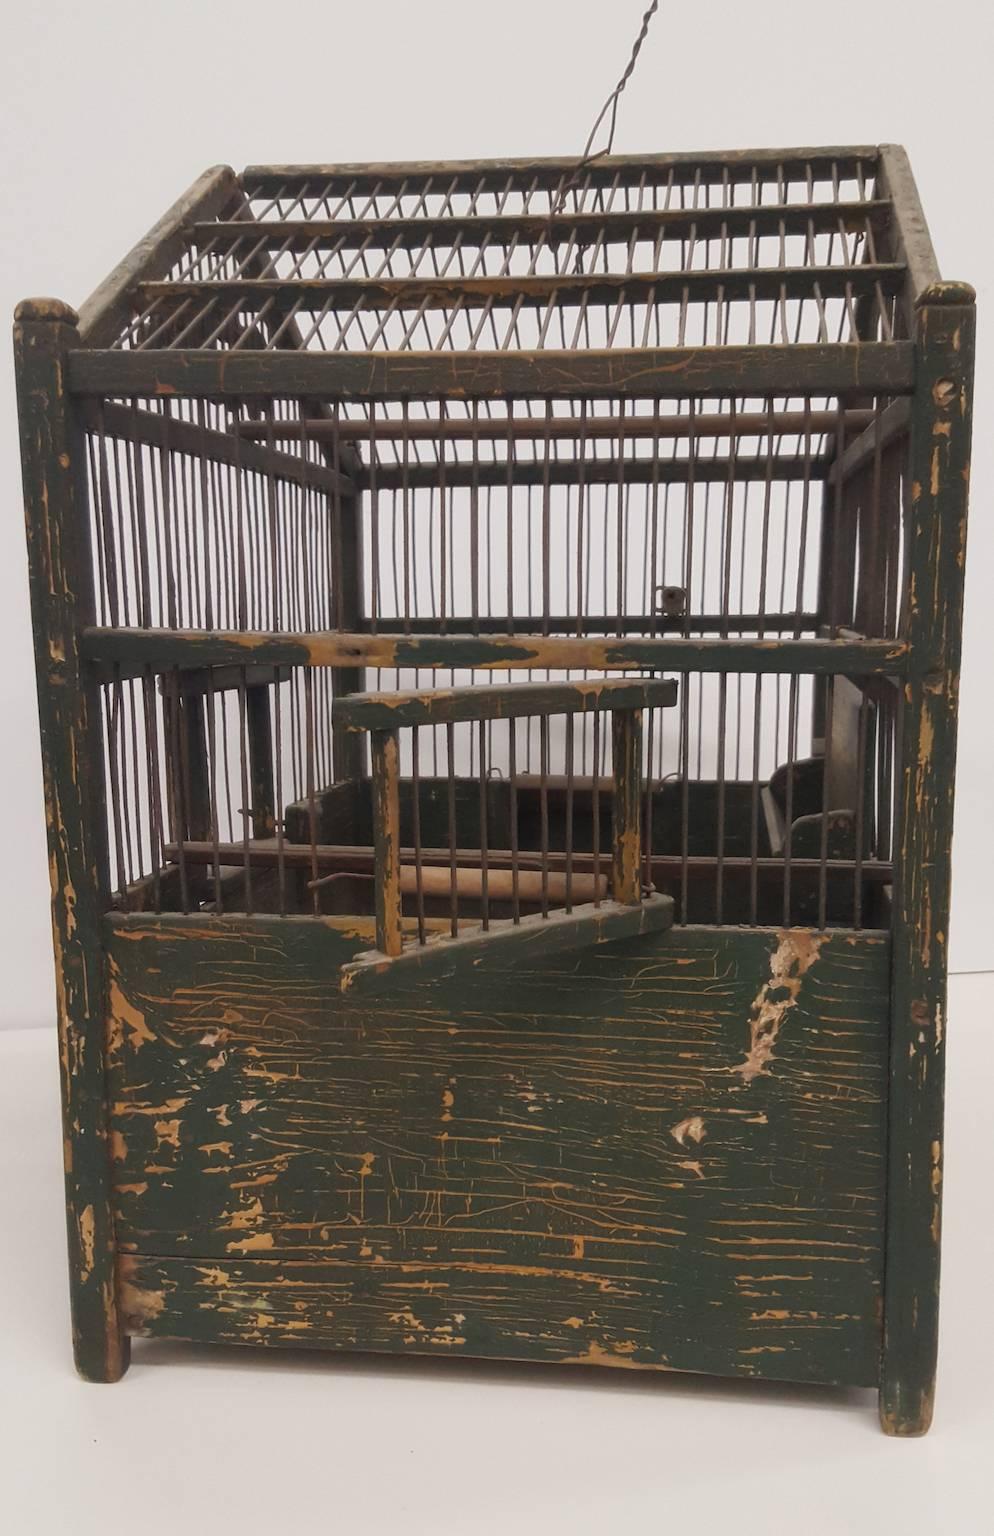 This good sized French bird cage is painted a dark green. Over time the paint has become heavily distressed, showing a mustard paint beneath the green, with occasional chips, cracks, and losses showing the bare wood below. It has multiple perches, a